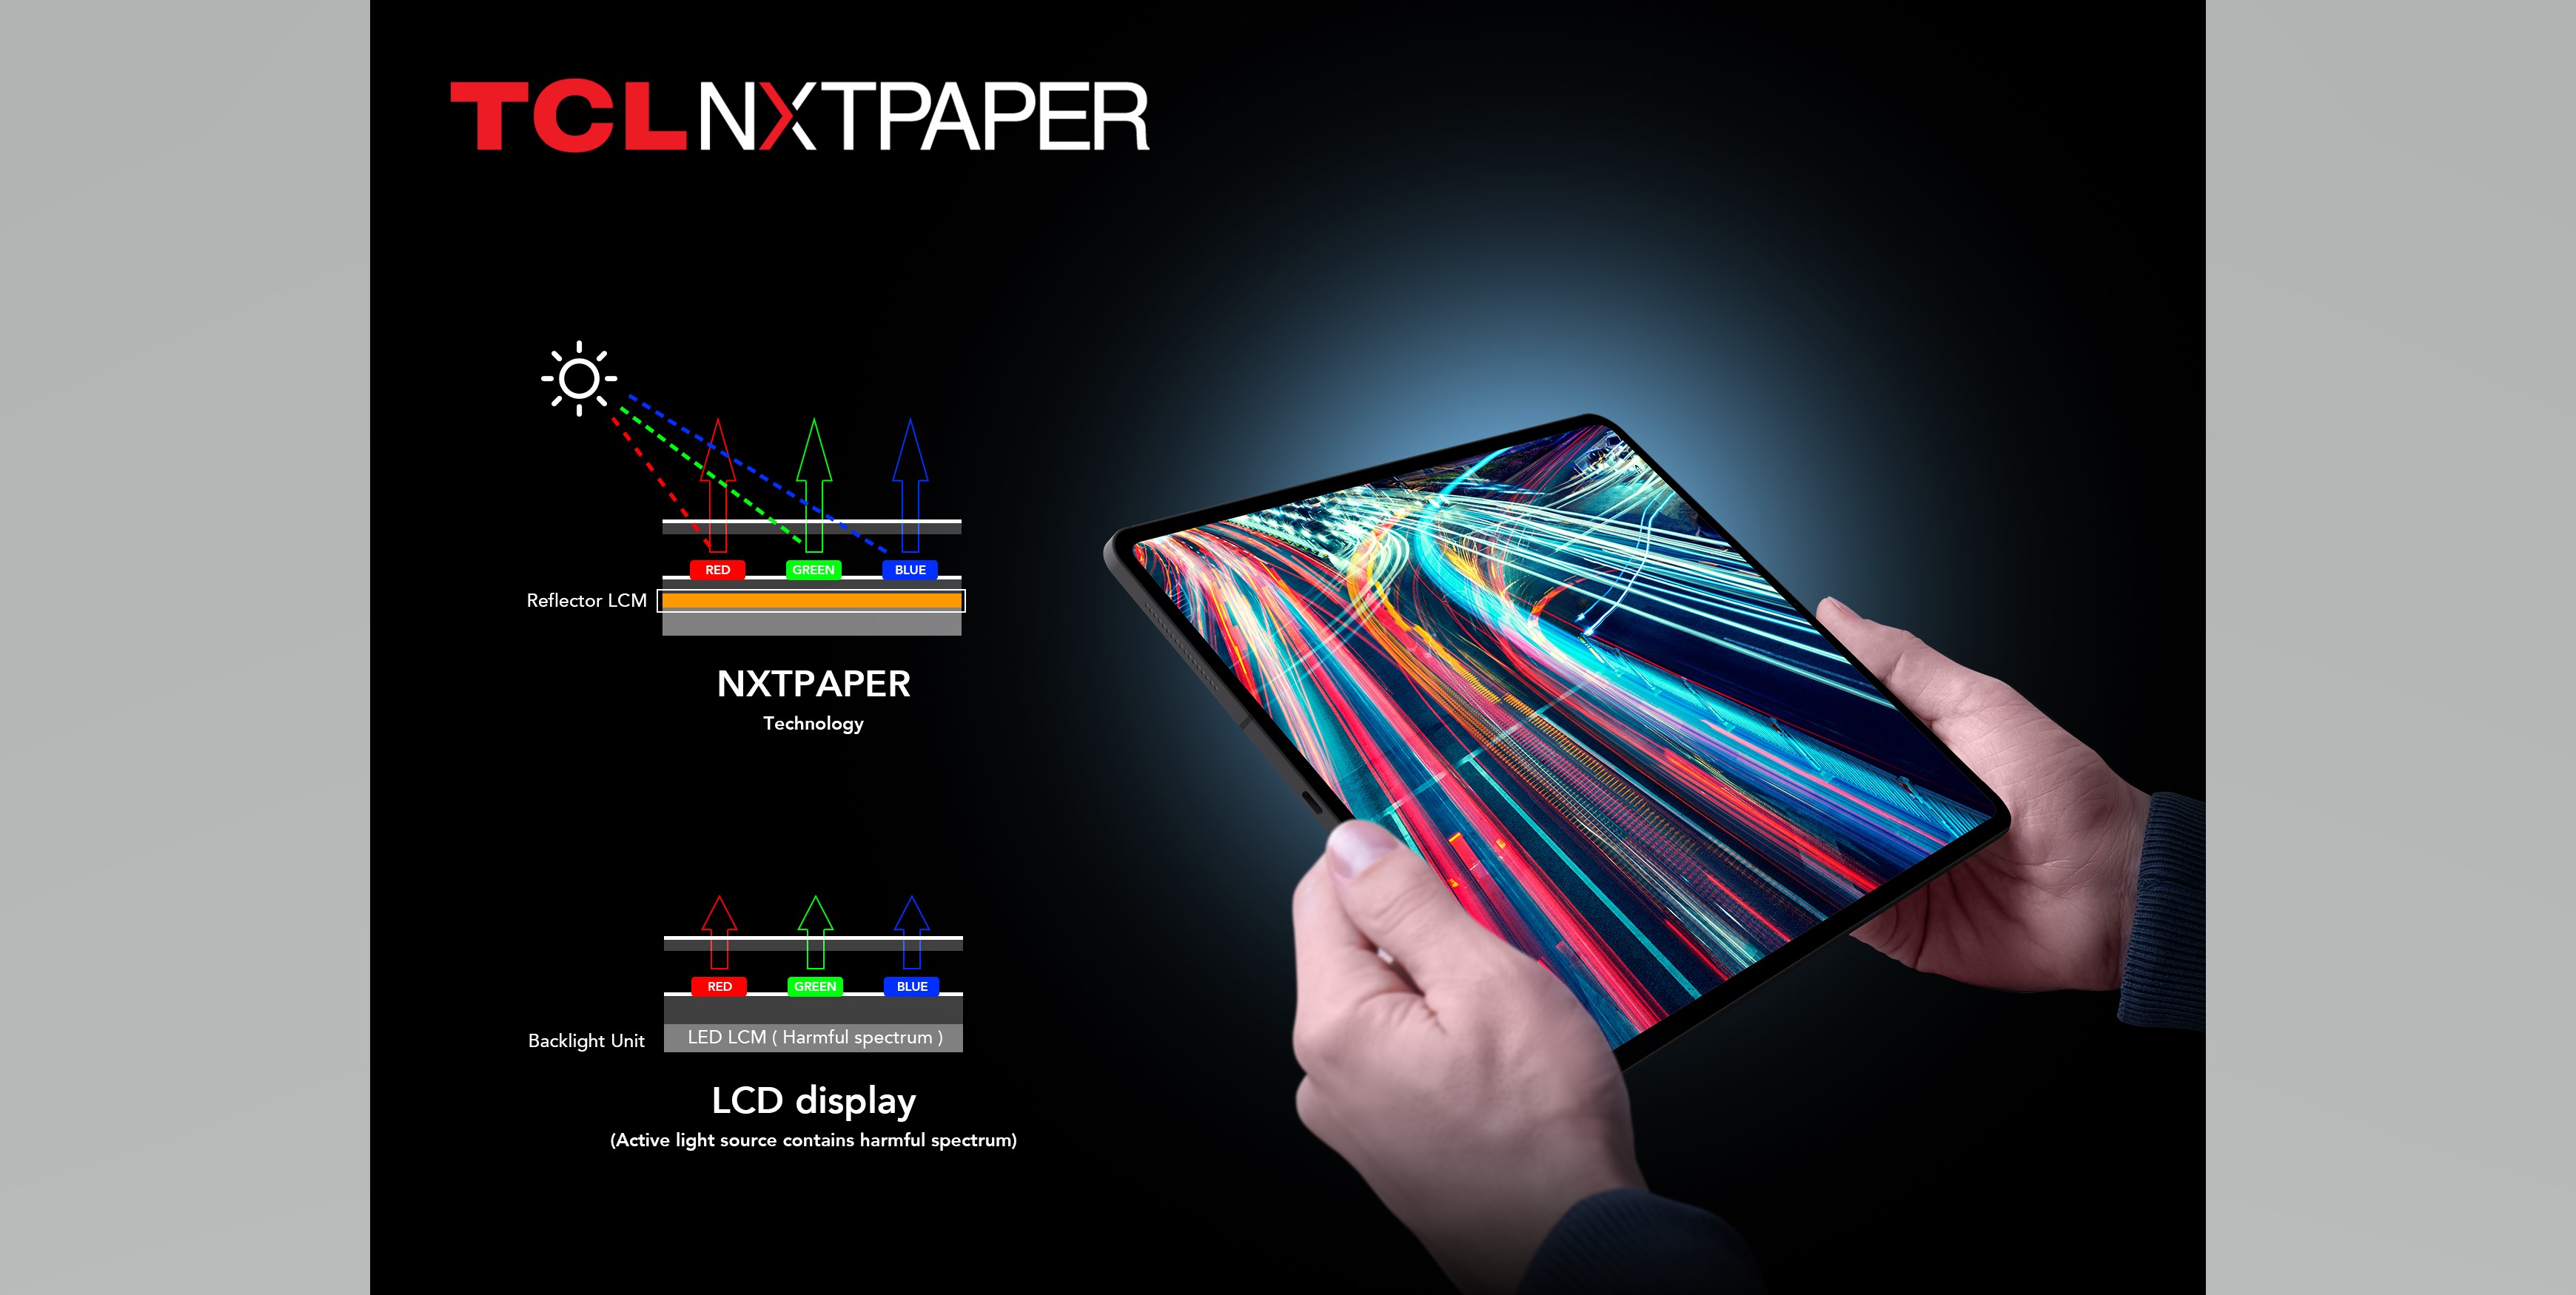 TCL NXTPAPER 11 wins iF Design Award for its paper-like display